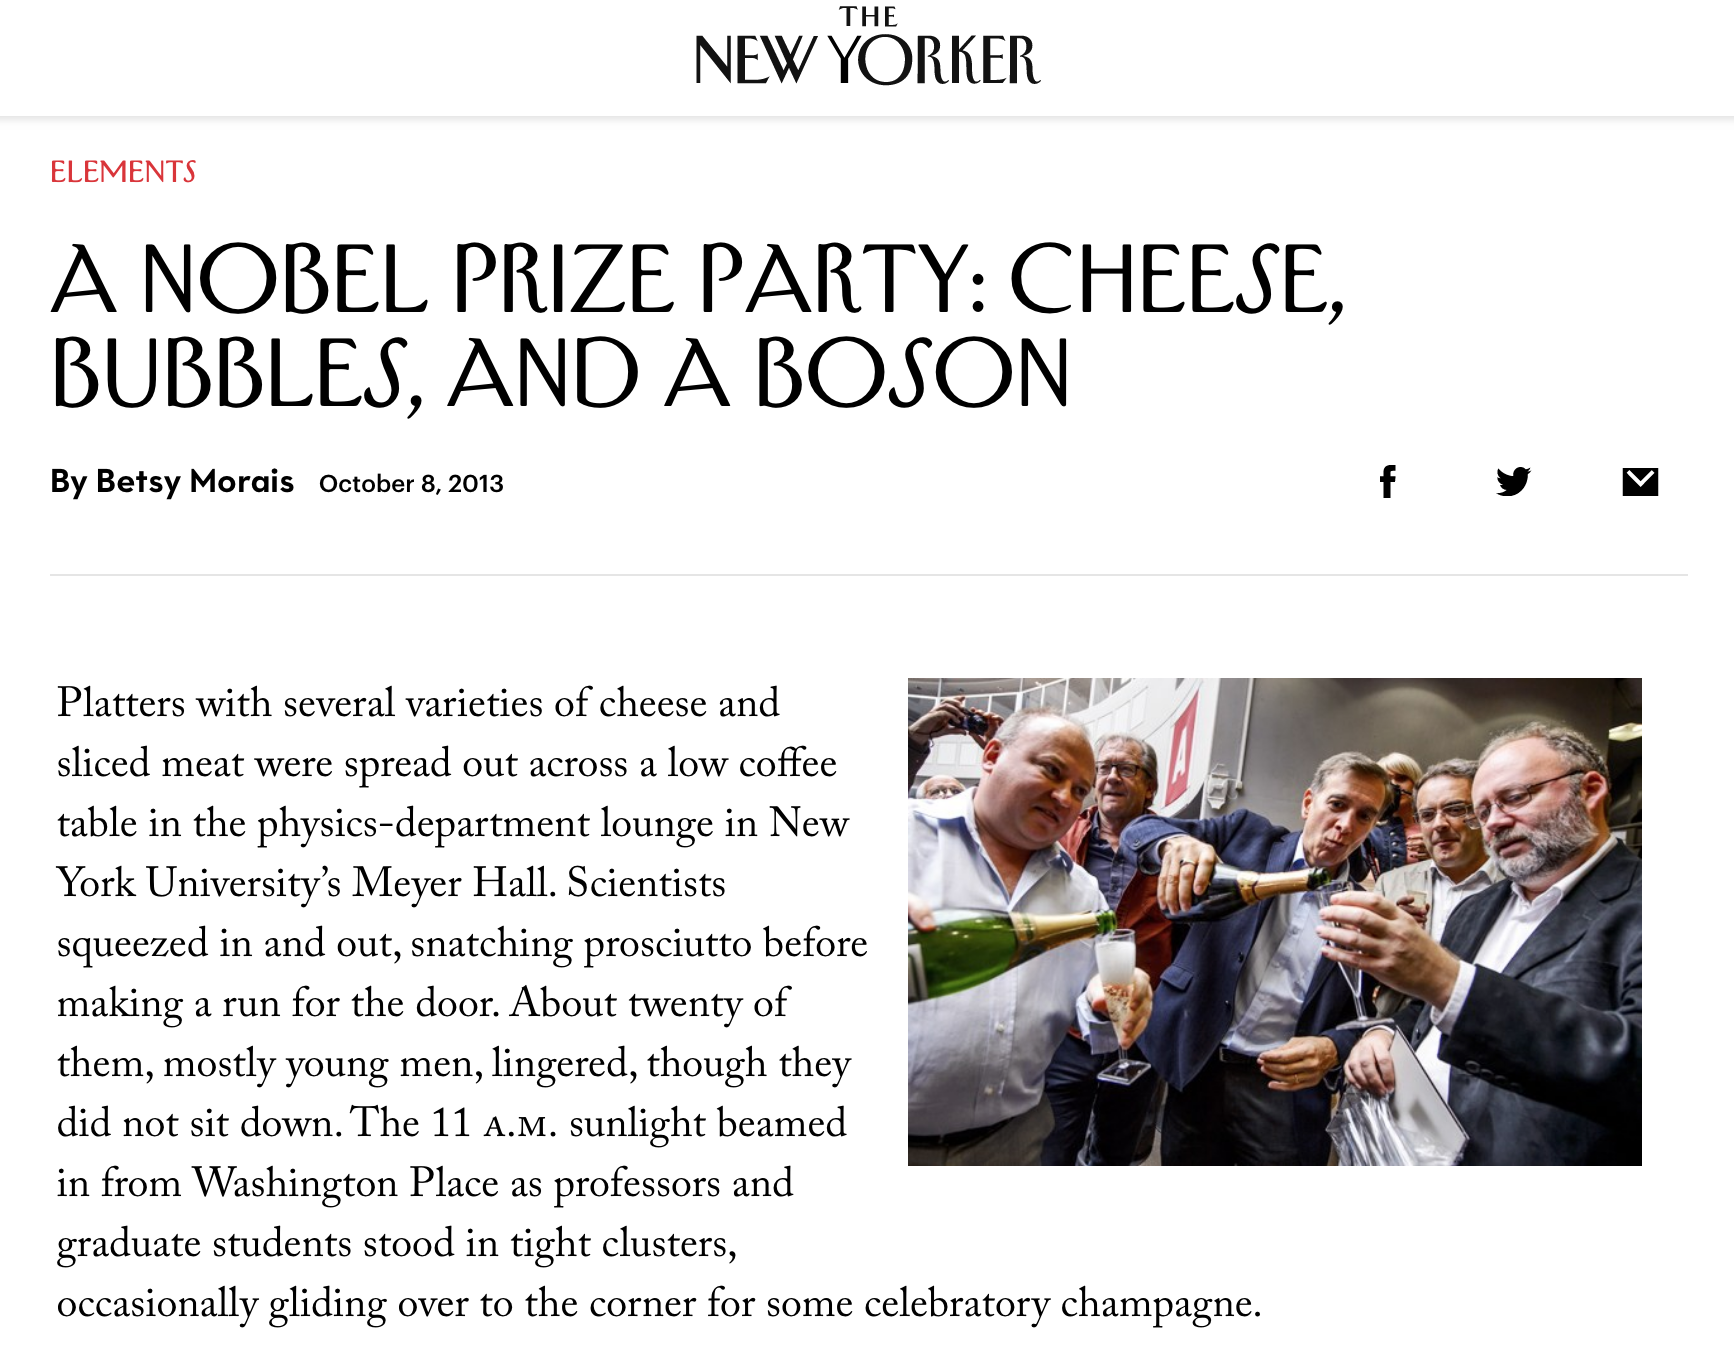 New Yorker article about the party at the NYU Physics Department